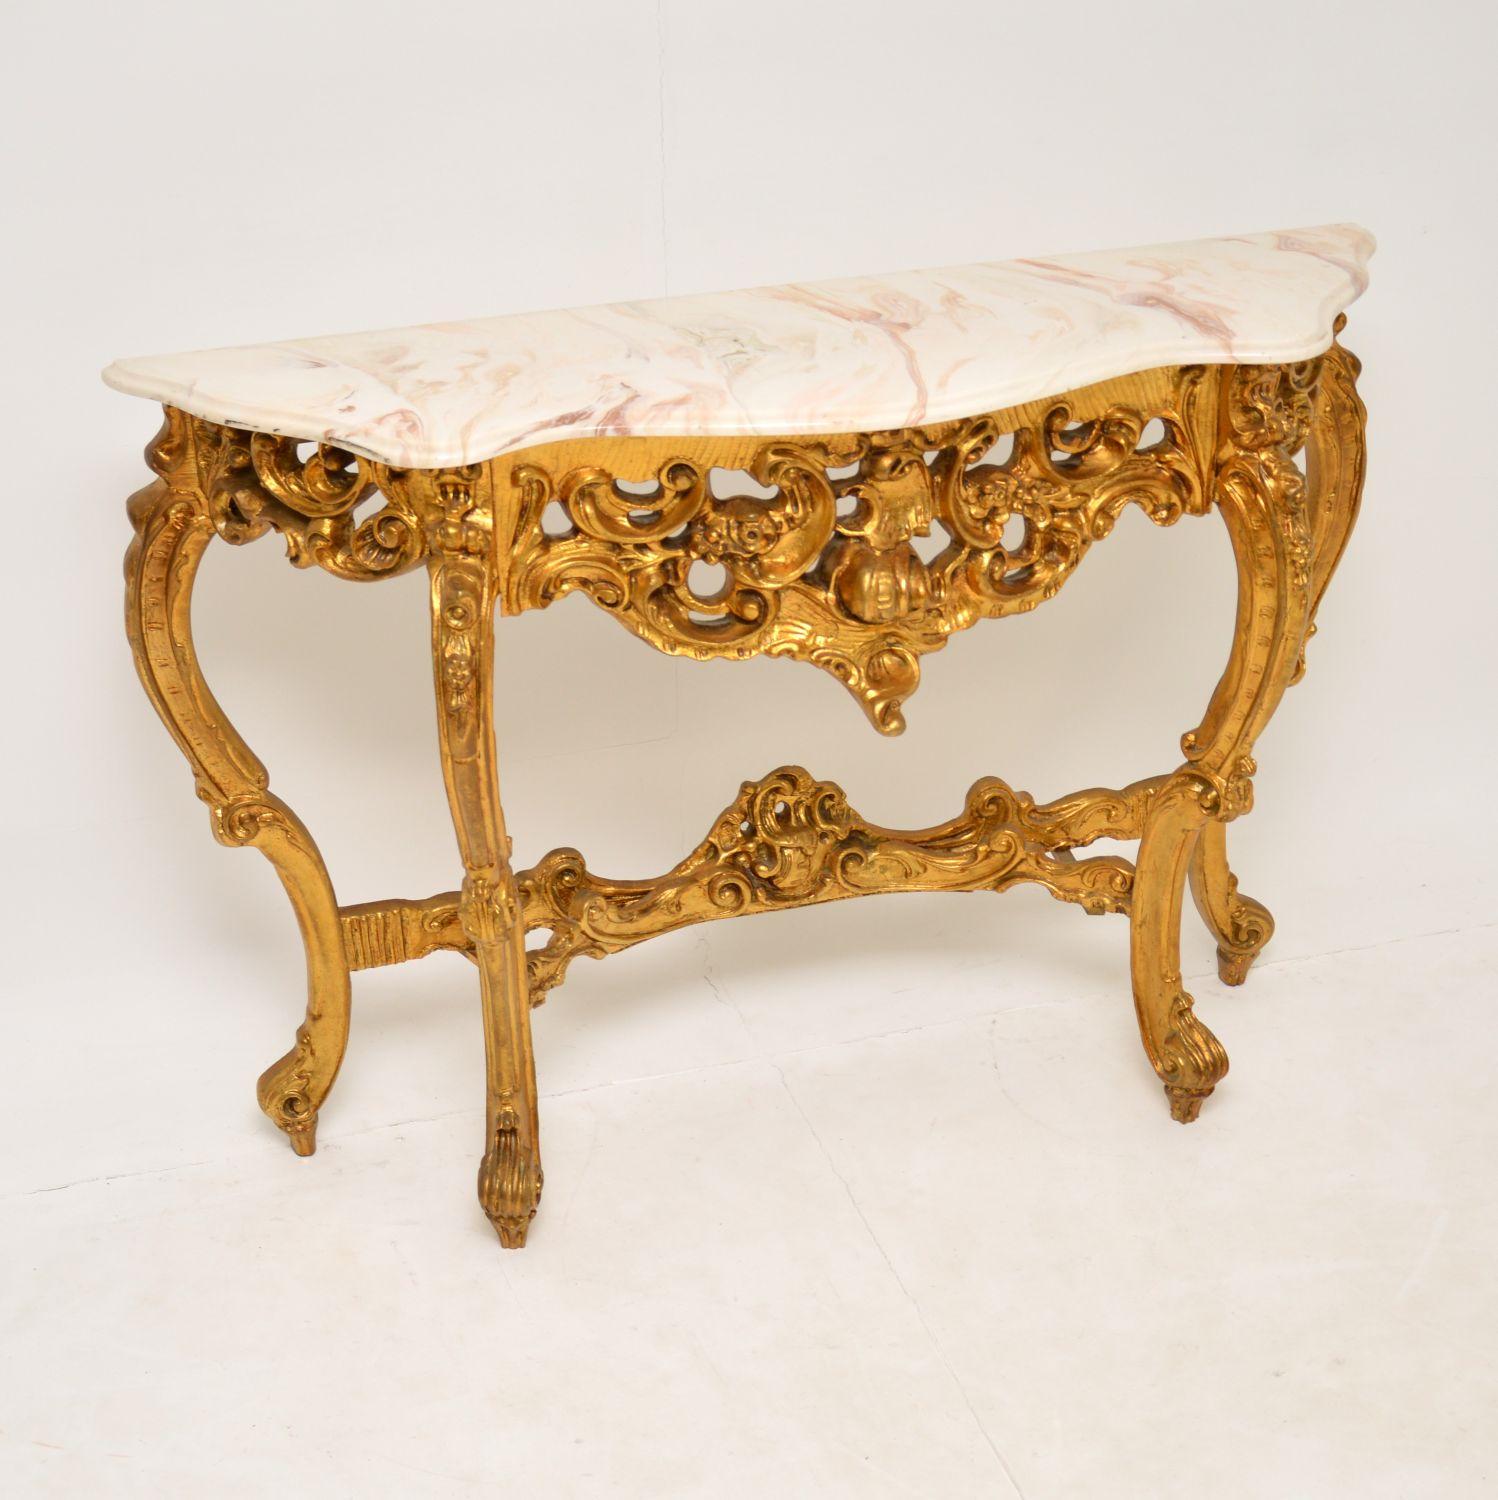 A beautiful gilt wood console table, in the antique French rococo style. This dates from around the 1950-60’s.

It is very well made and is in excellent condition for its age. The white composite marble top is clean and damage free, with beautiful